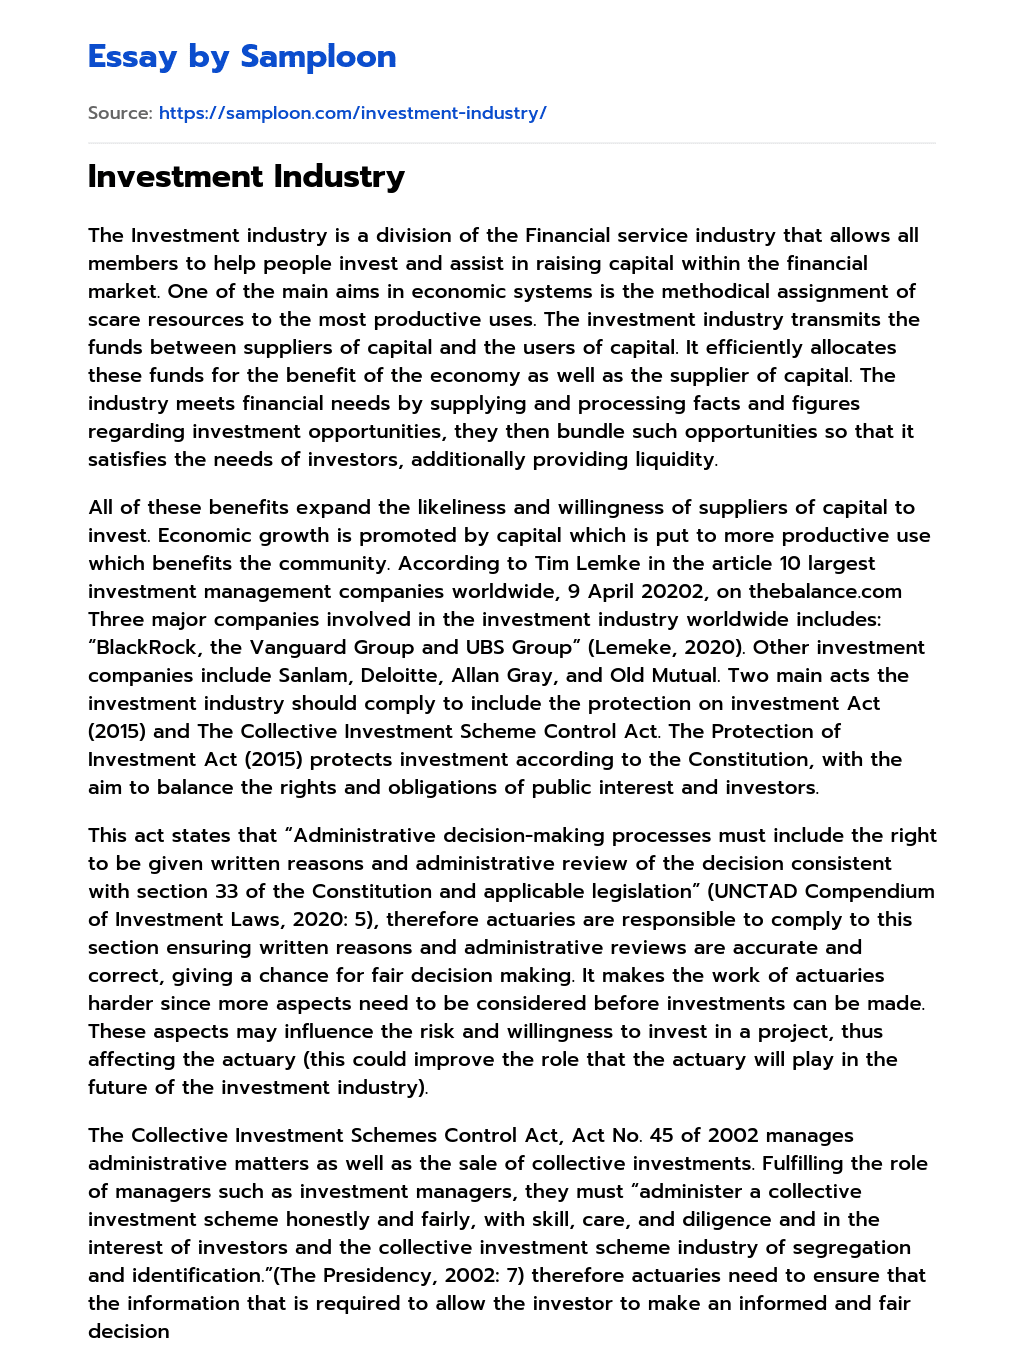 Investment Industry essay